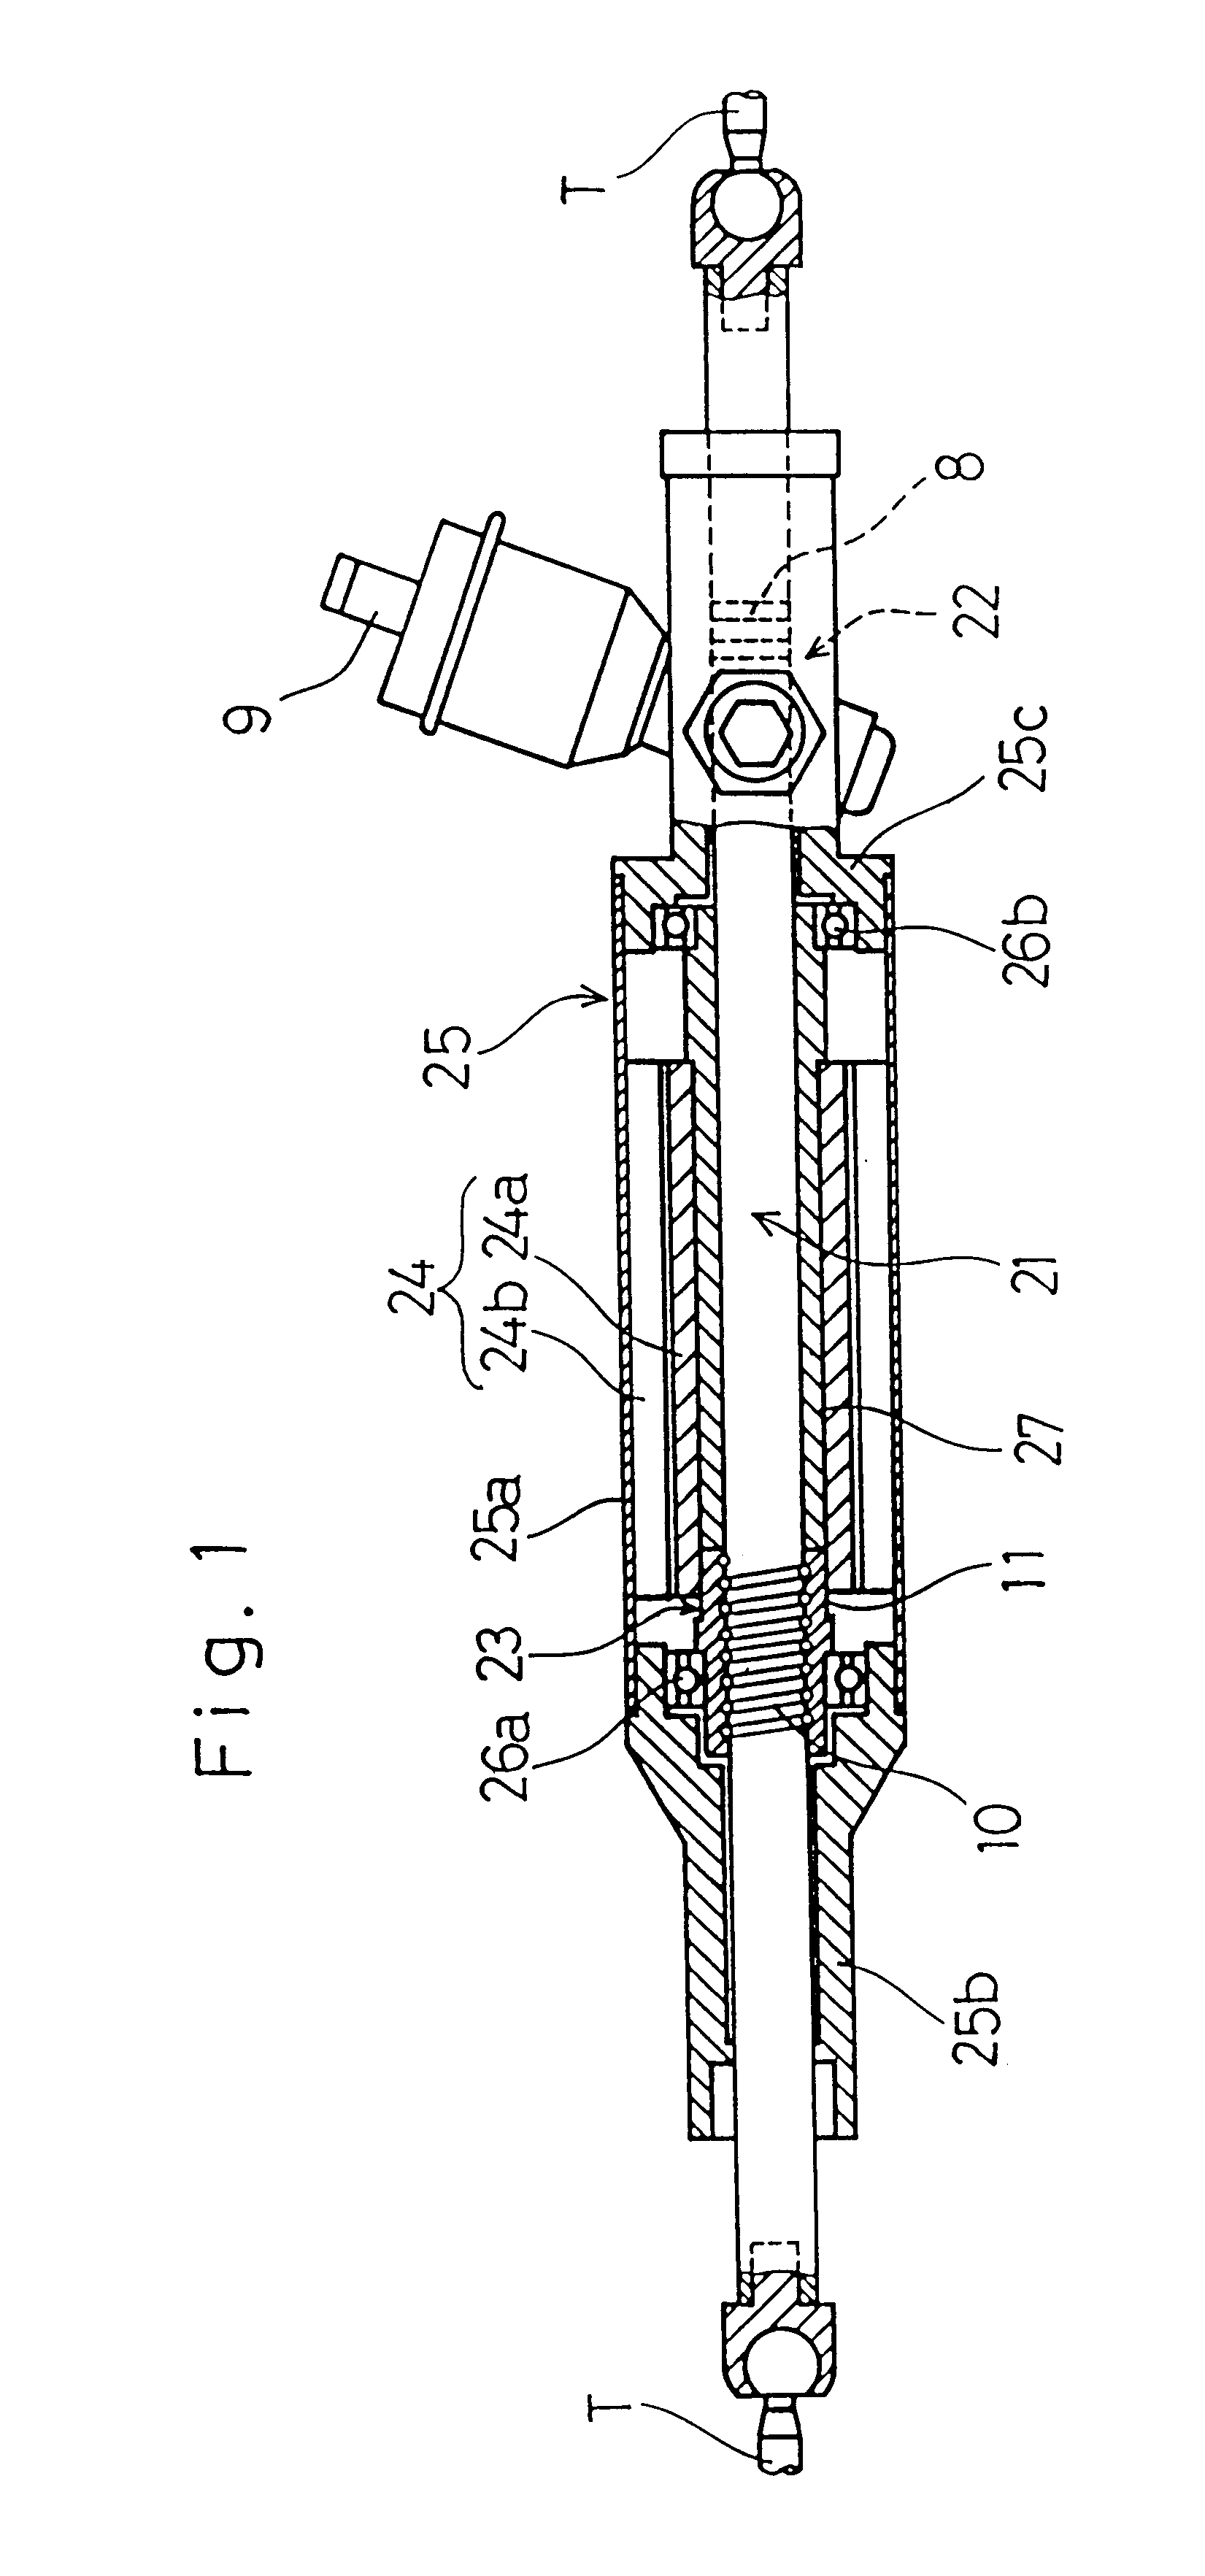 Electrically powered steering device